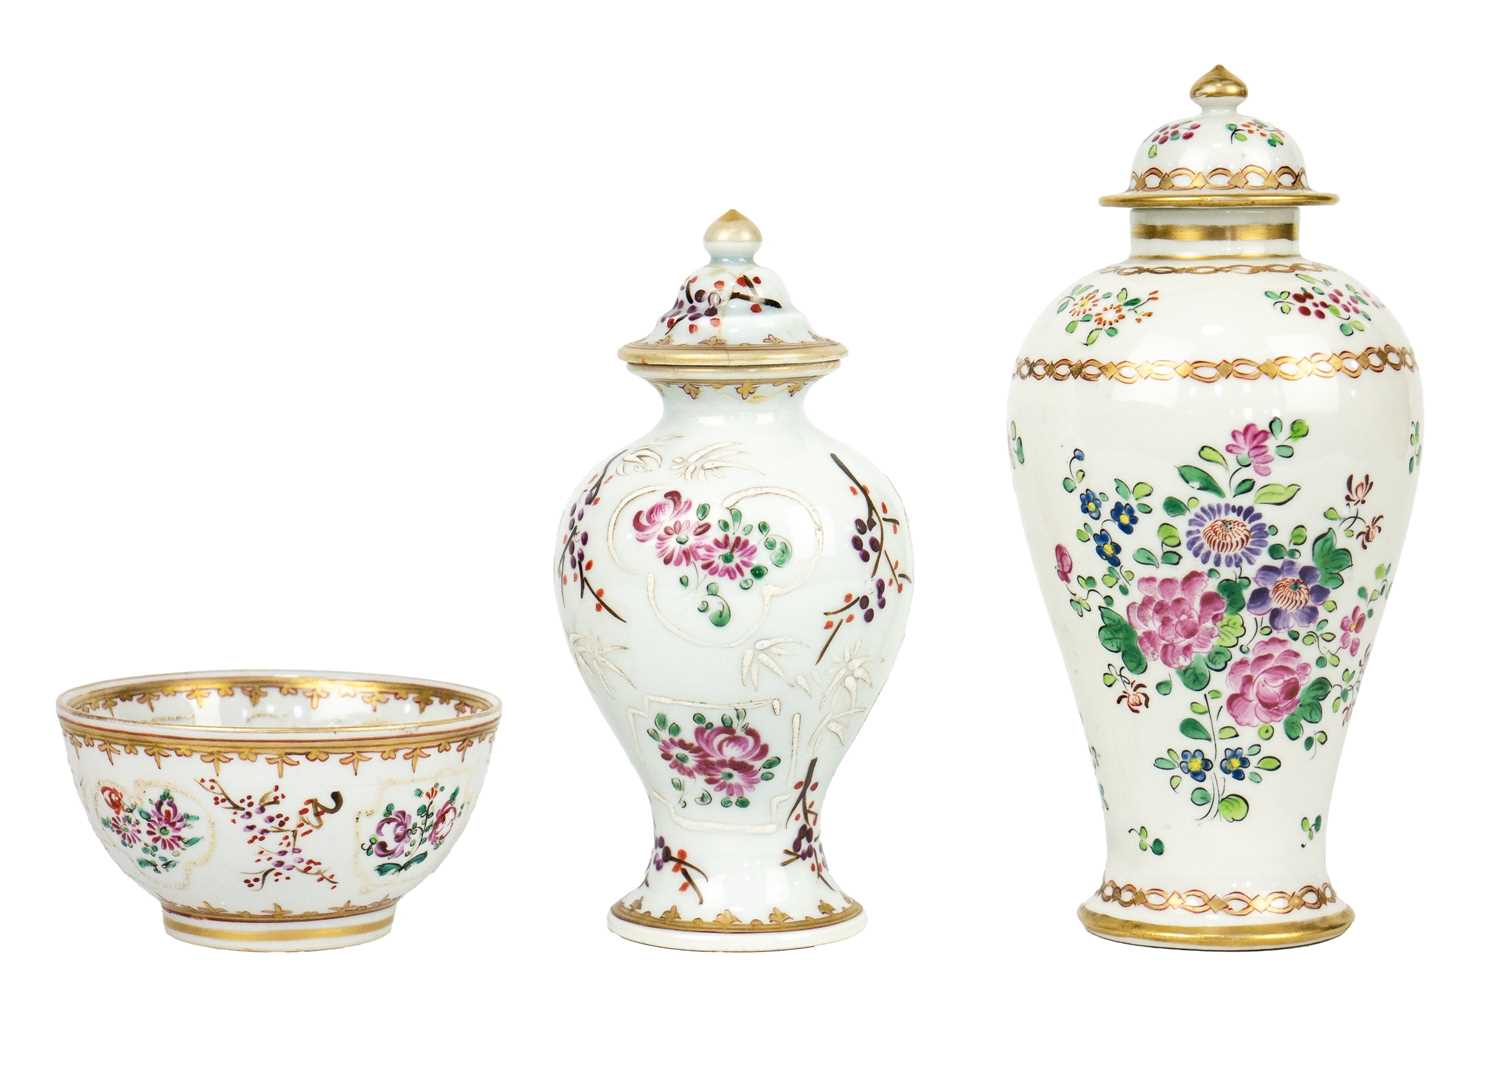 Two Samson porcelain famille rose vases, in Chinese export style, circa 1900. - Image 8 of 12